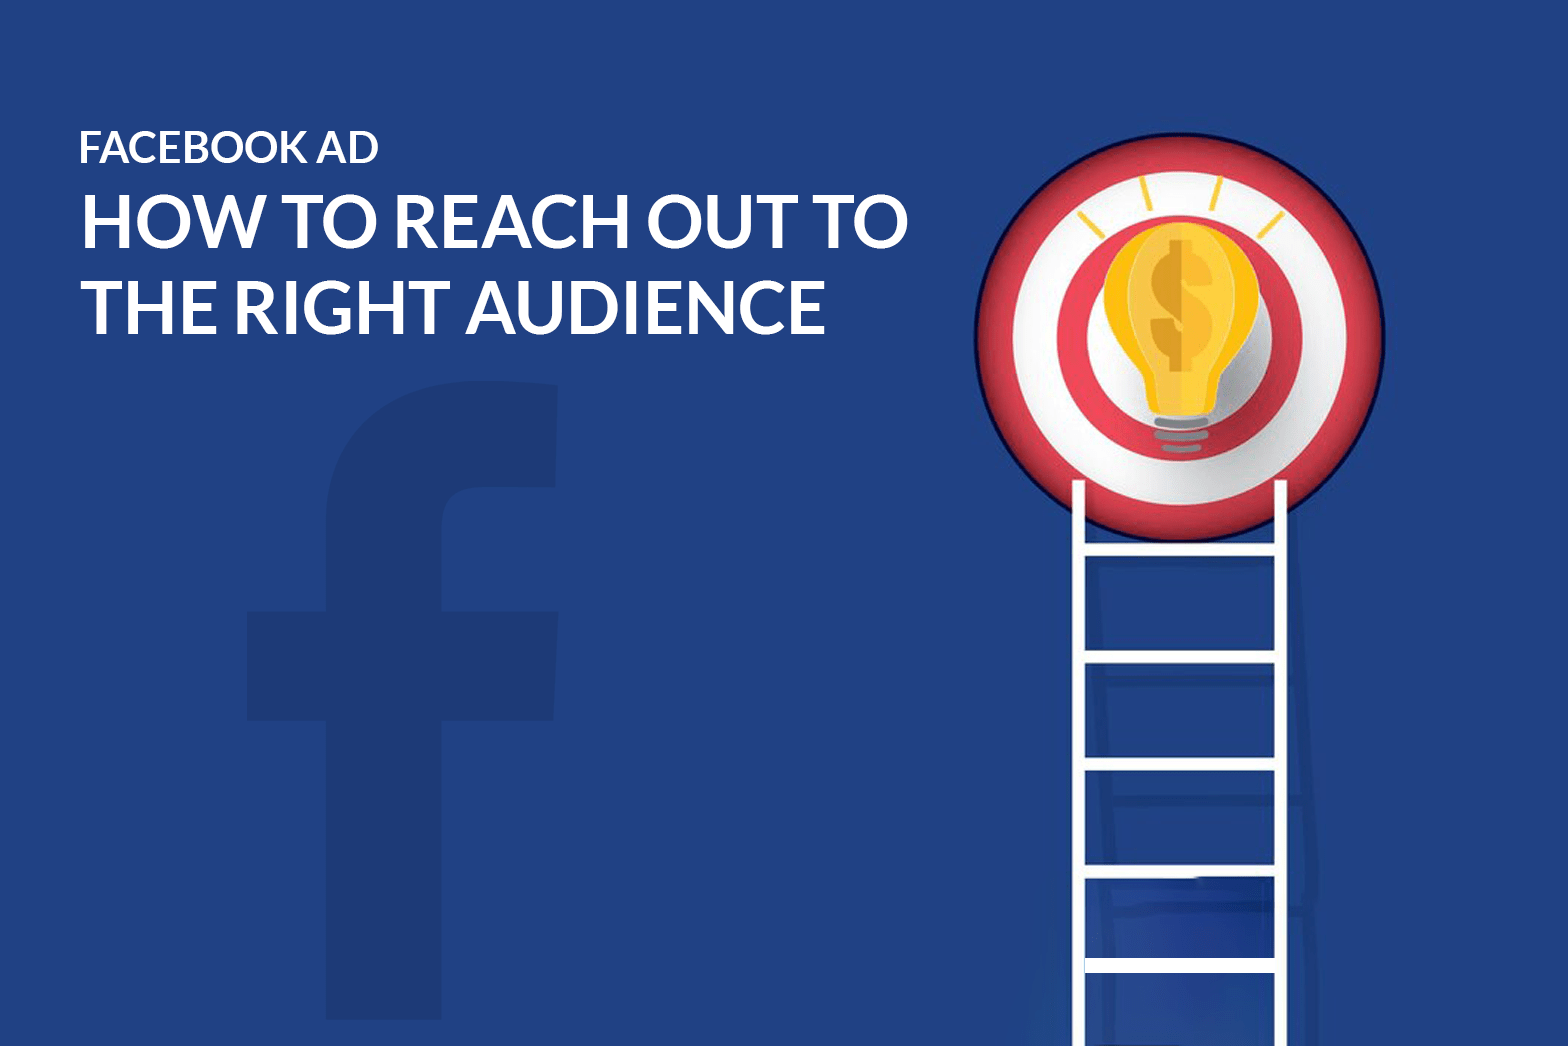 Facebook Ad Targeting: How to Reach Out to The Right Audience